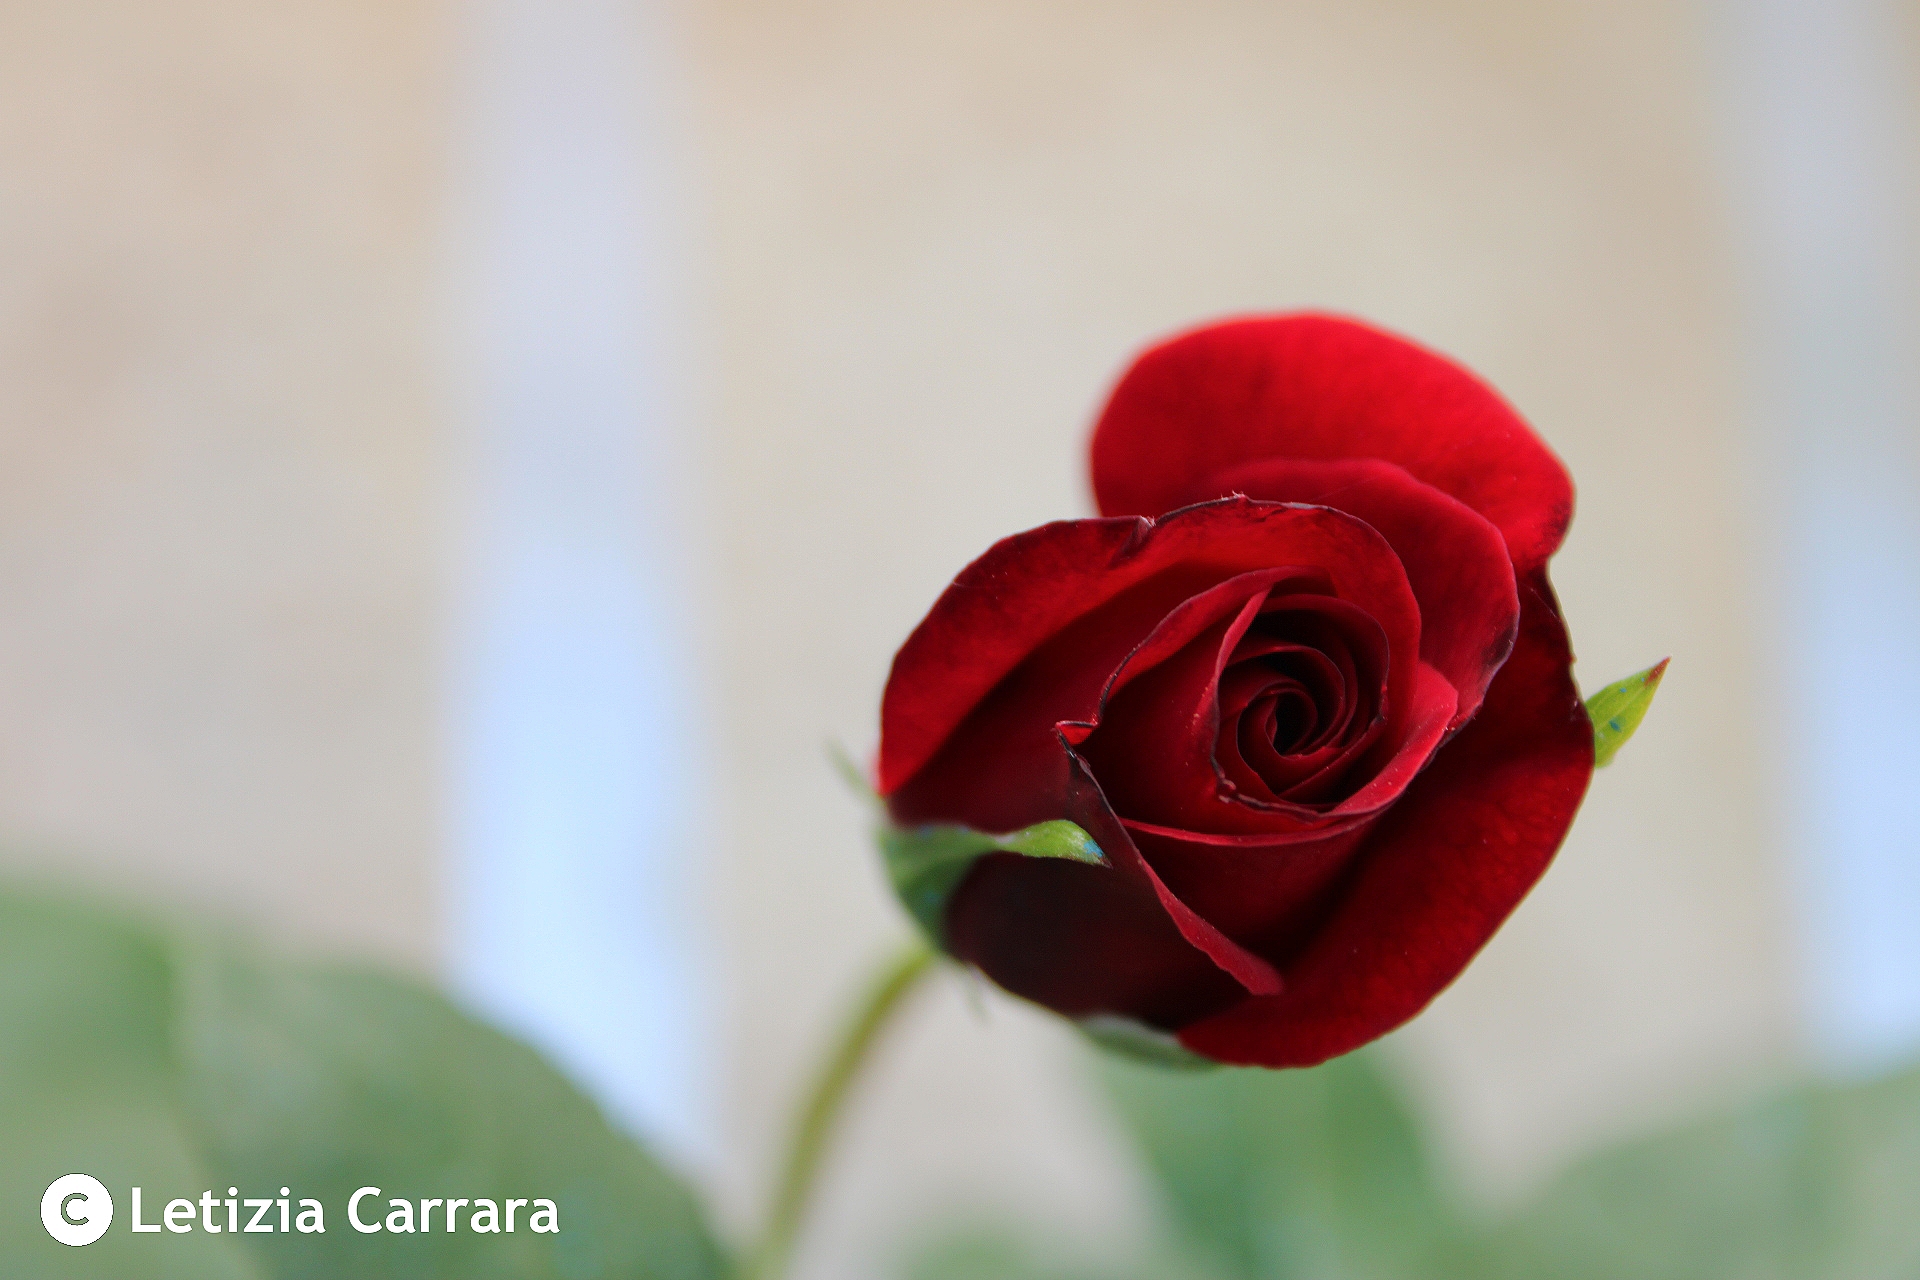 Birth of a red rose...